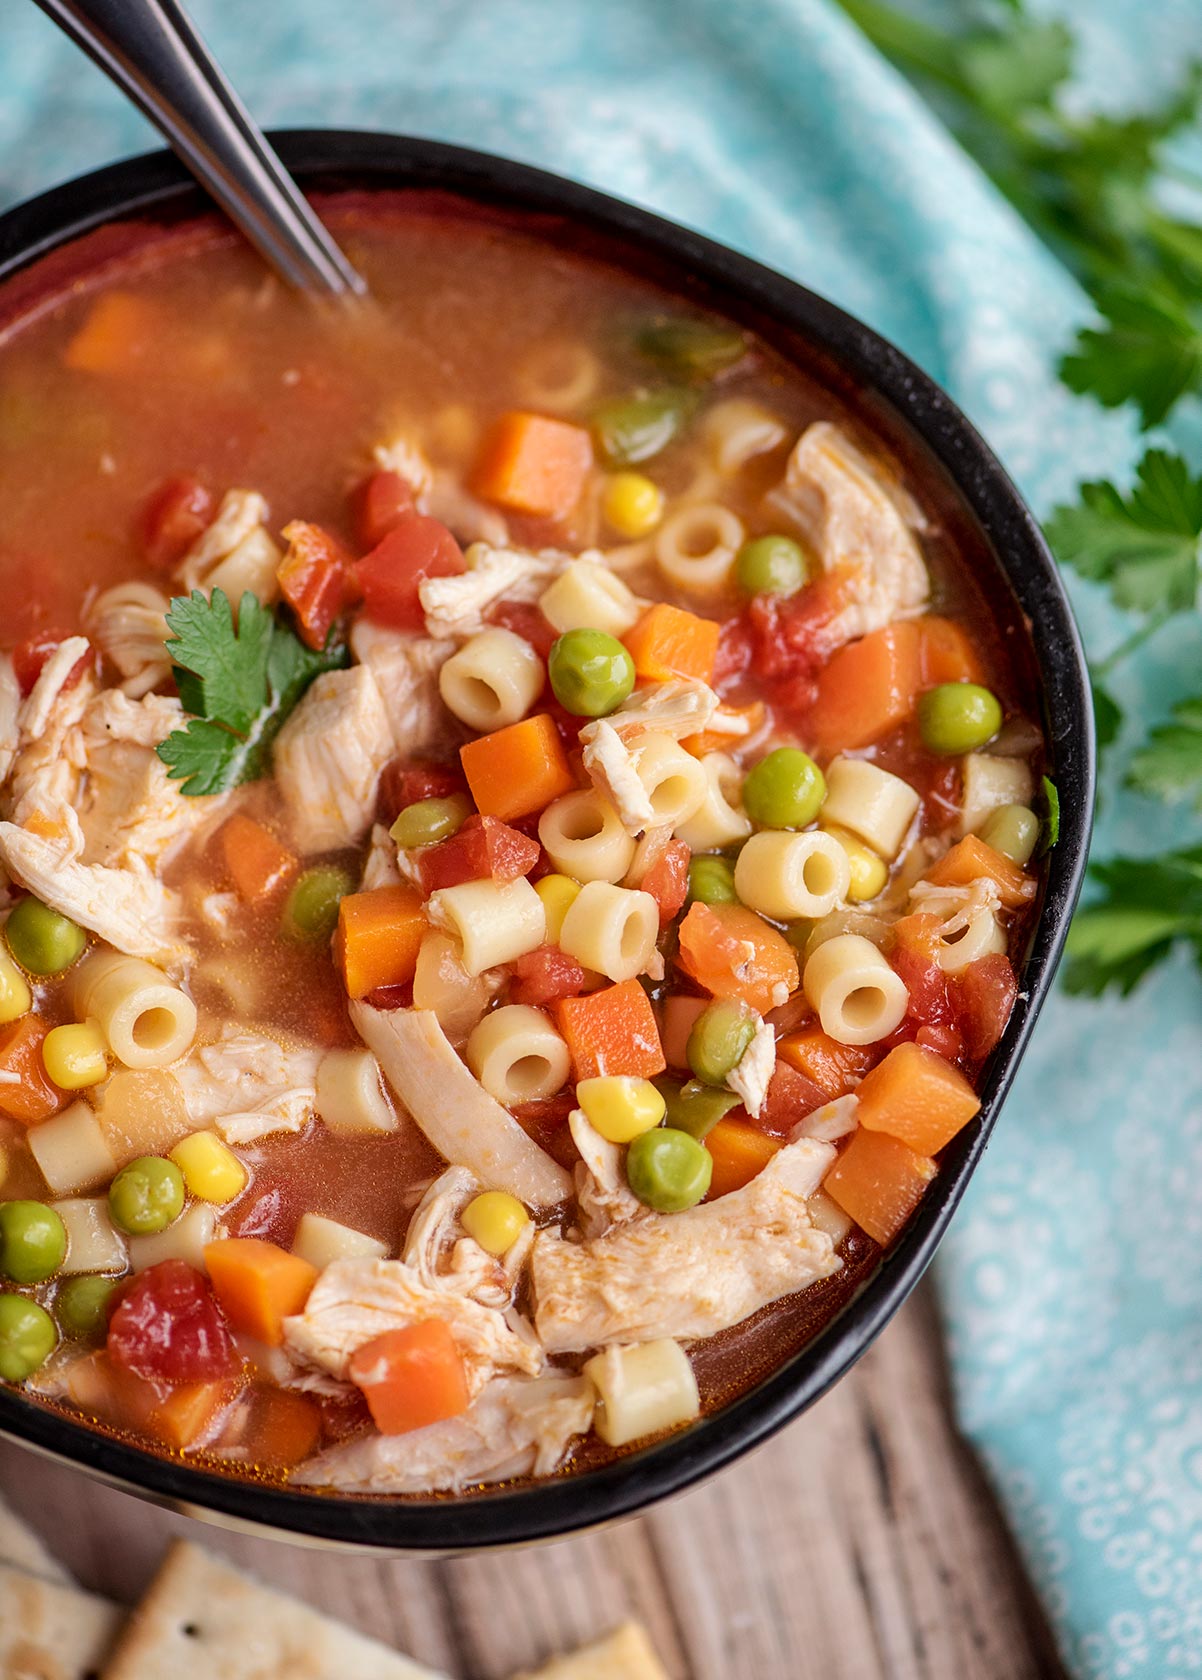 soup with chicken, vegetables, and noodles in a bowl 